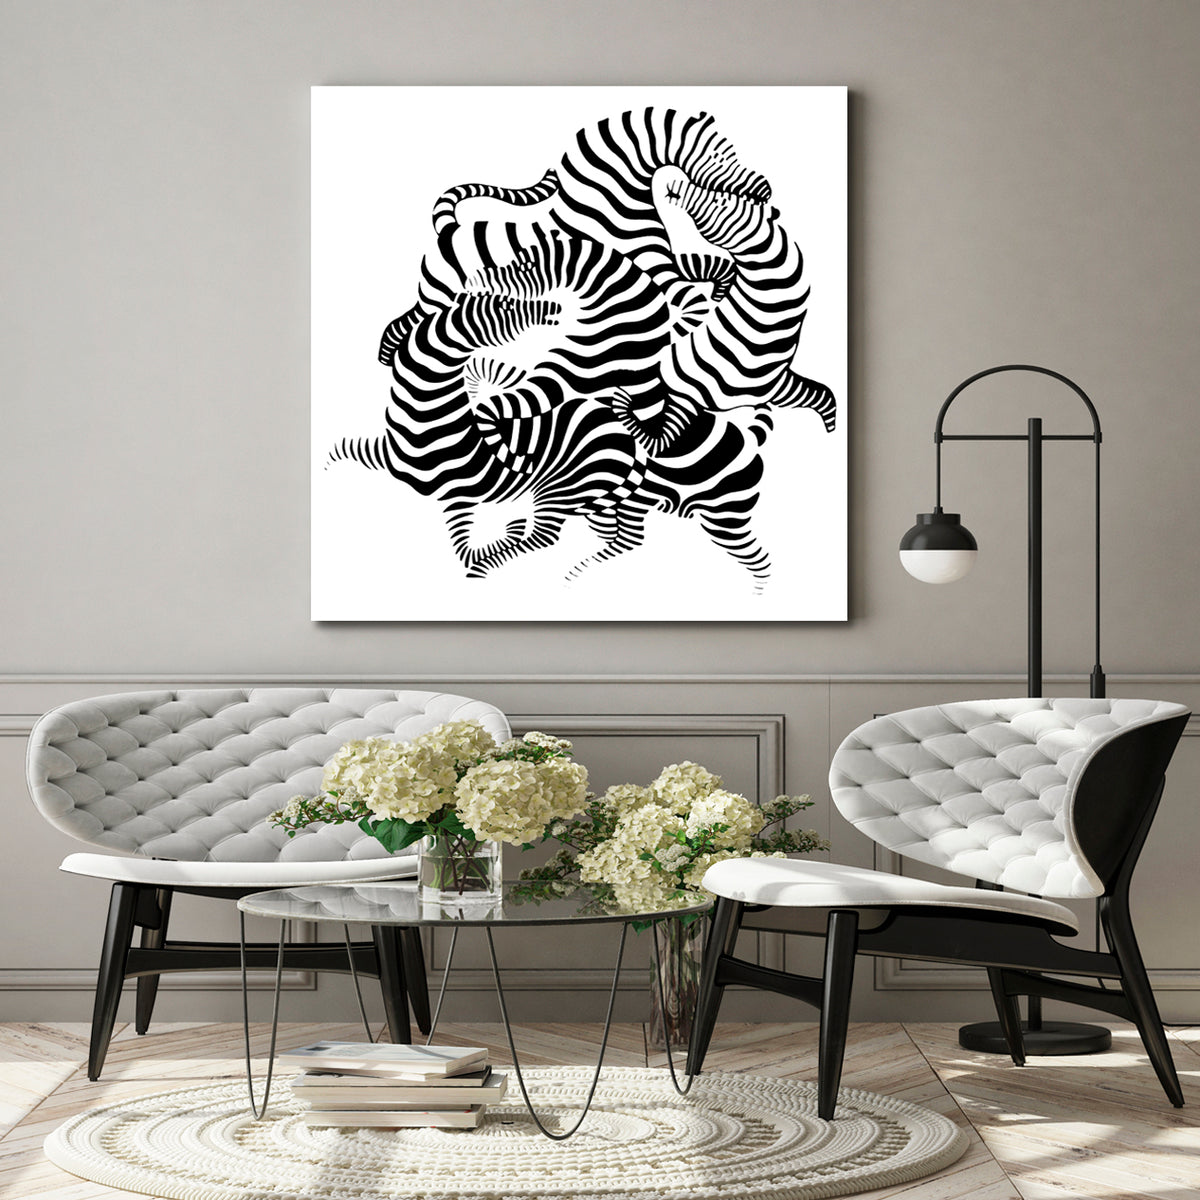 OPTICAL ILLUSION OP-ART Abstract Black White Zebra Entwined Together Fine Art Artesty 1 Panel 12"x12" 